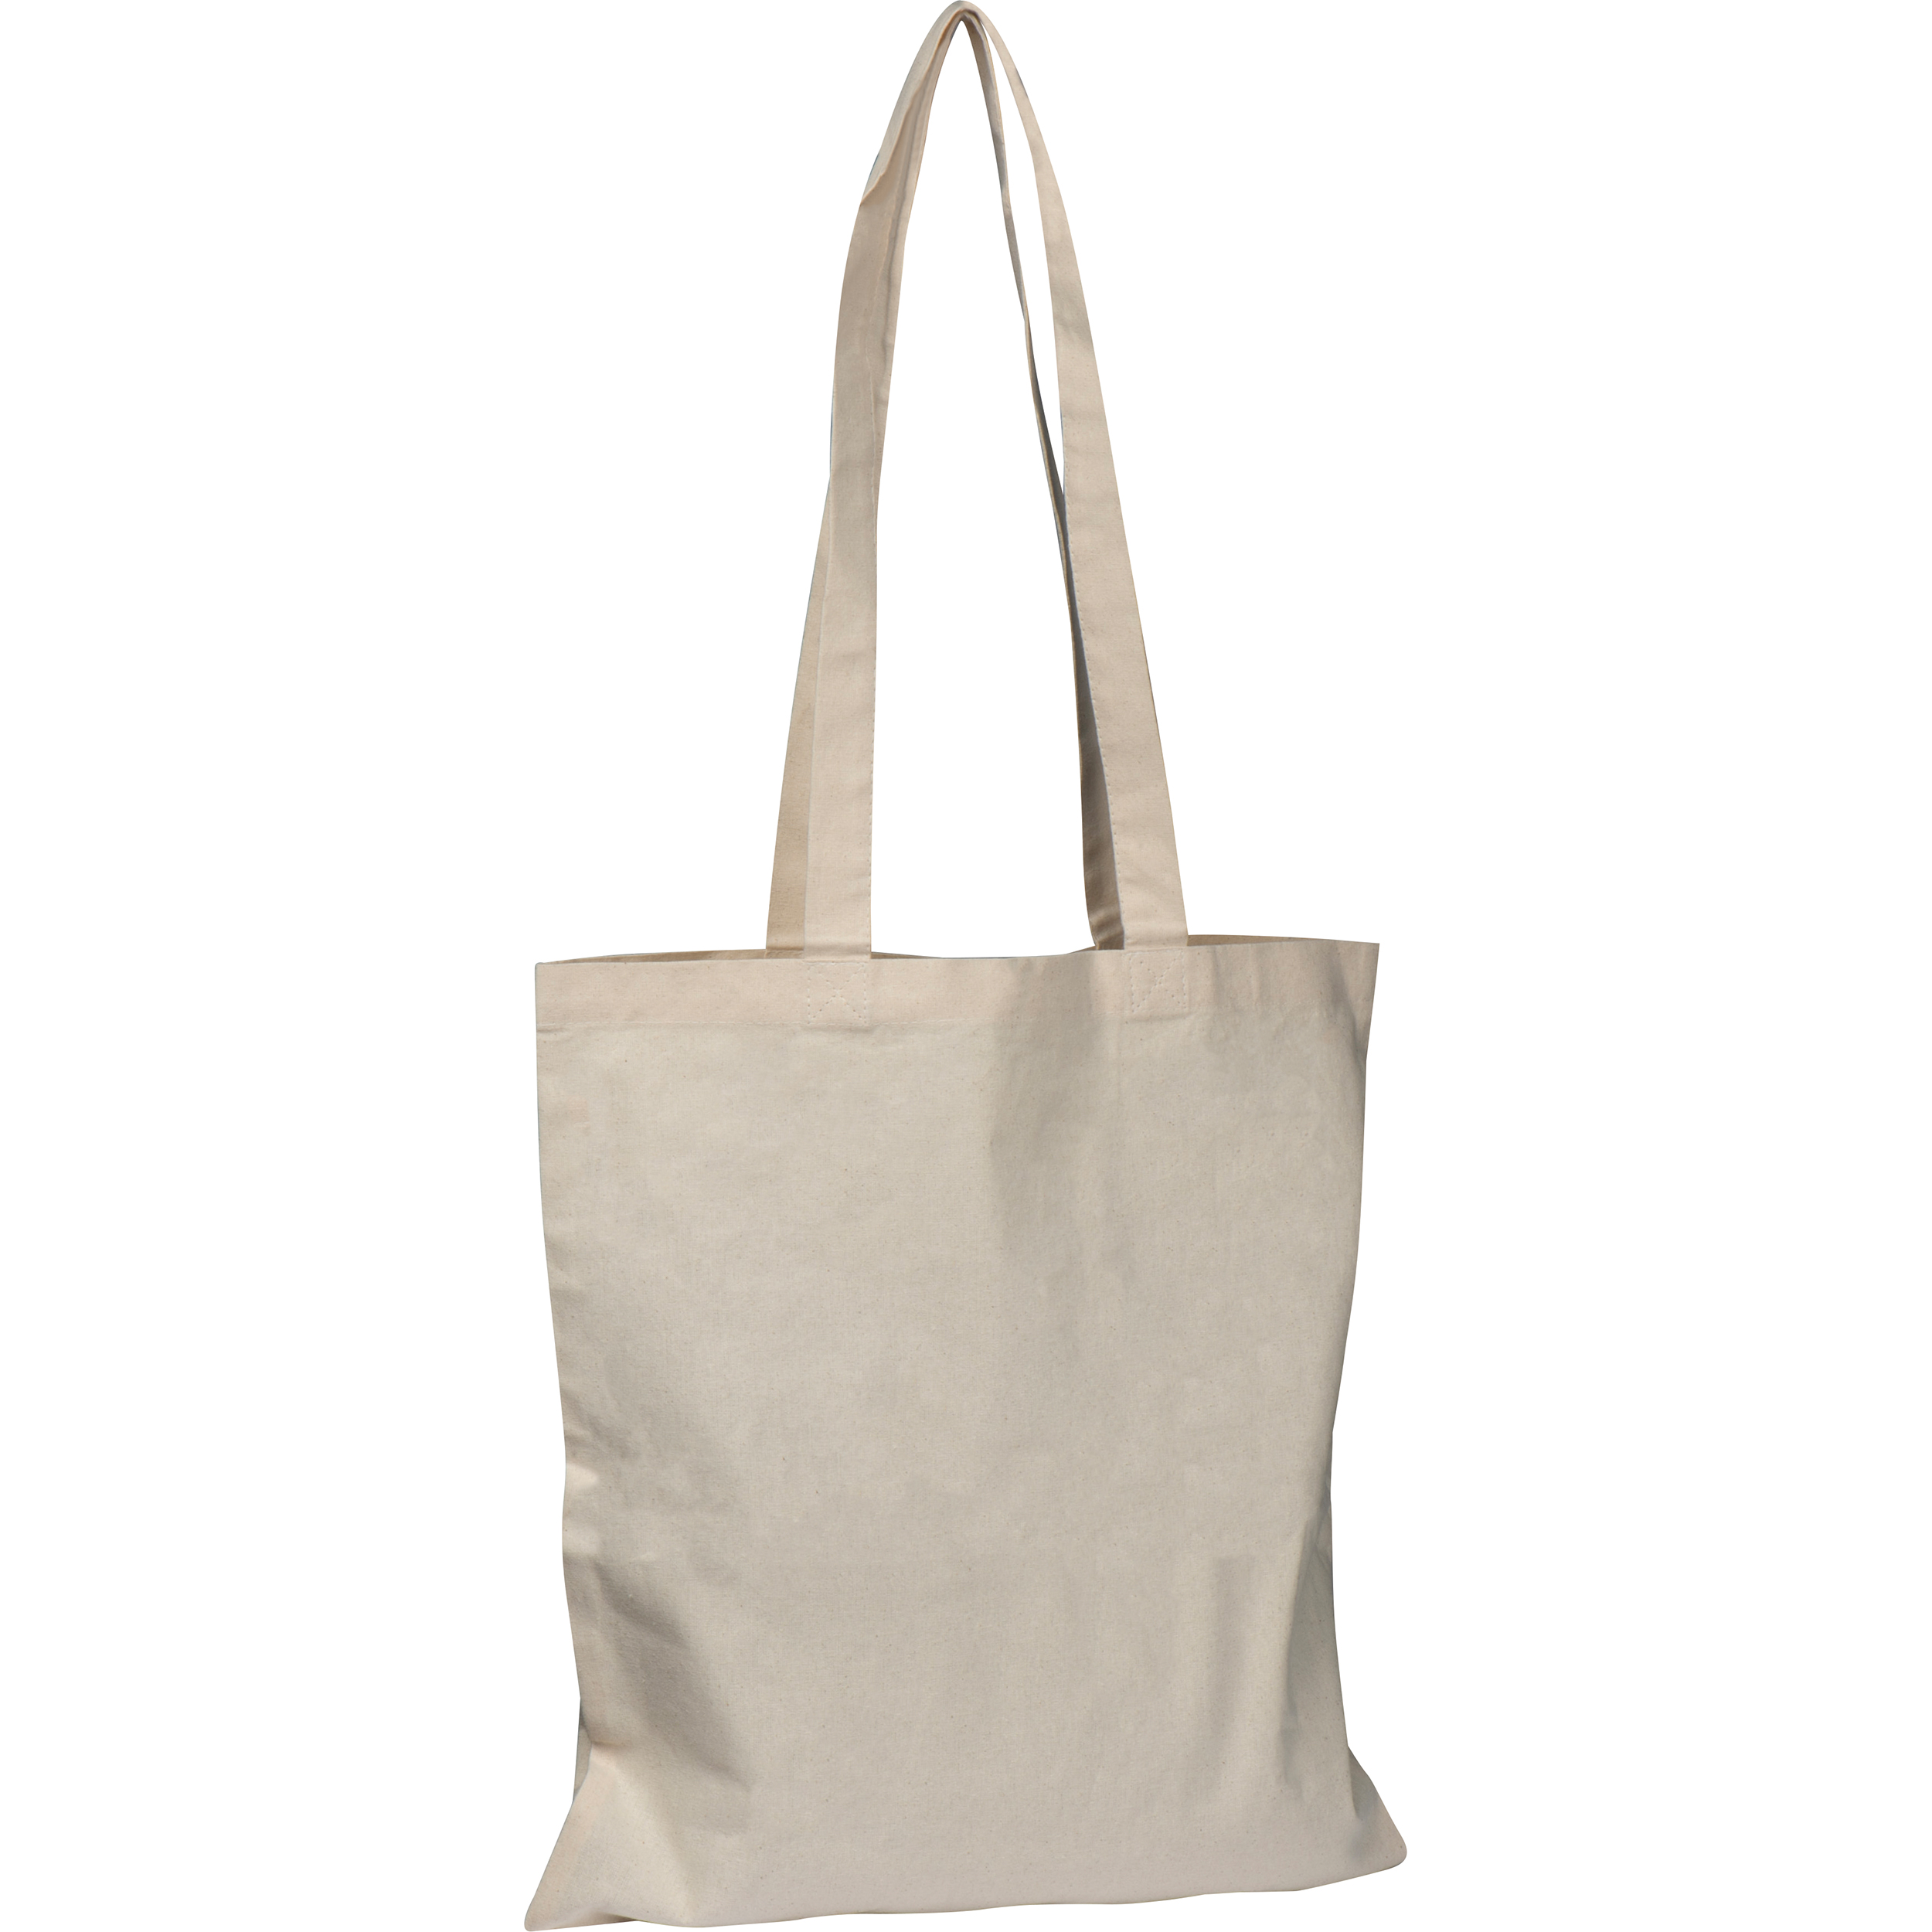 Cotton bag with long handles 180g/m²